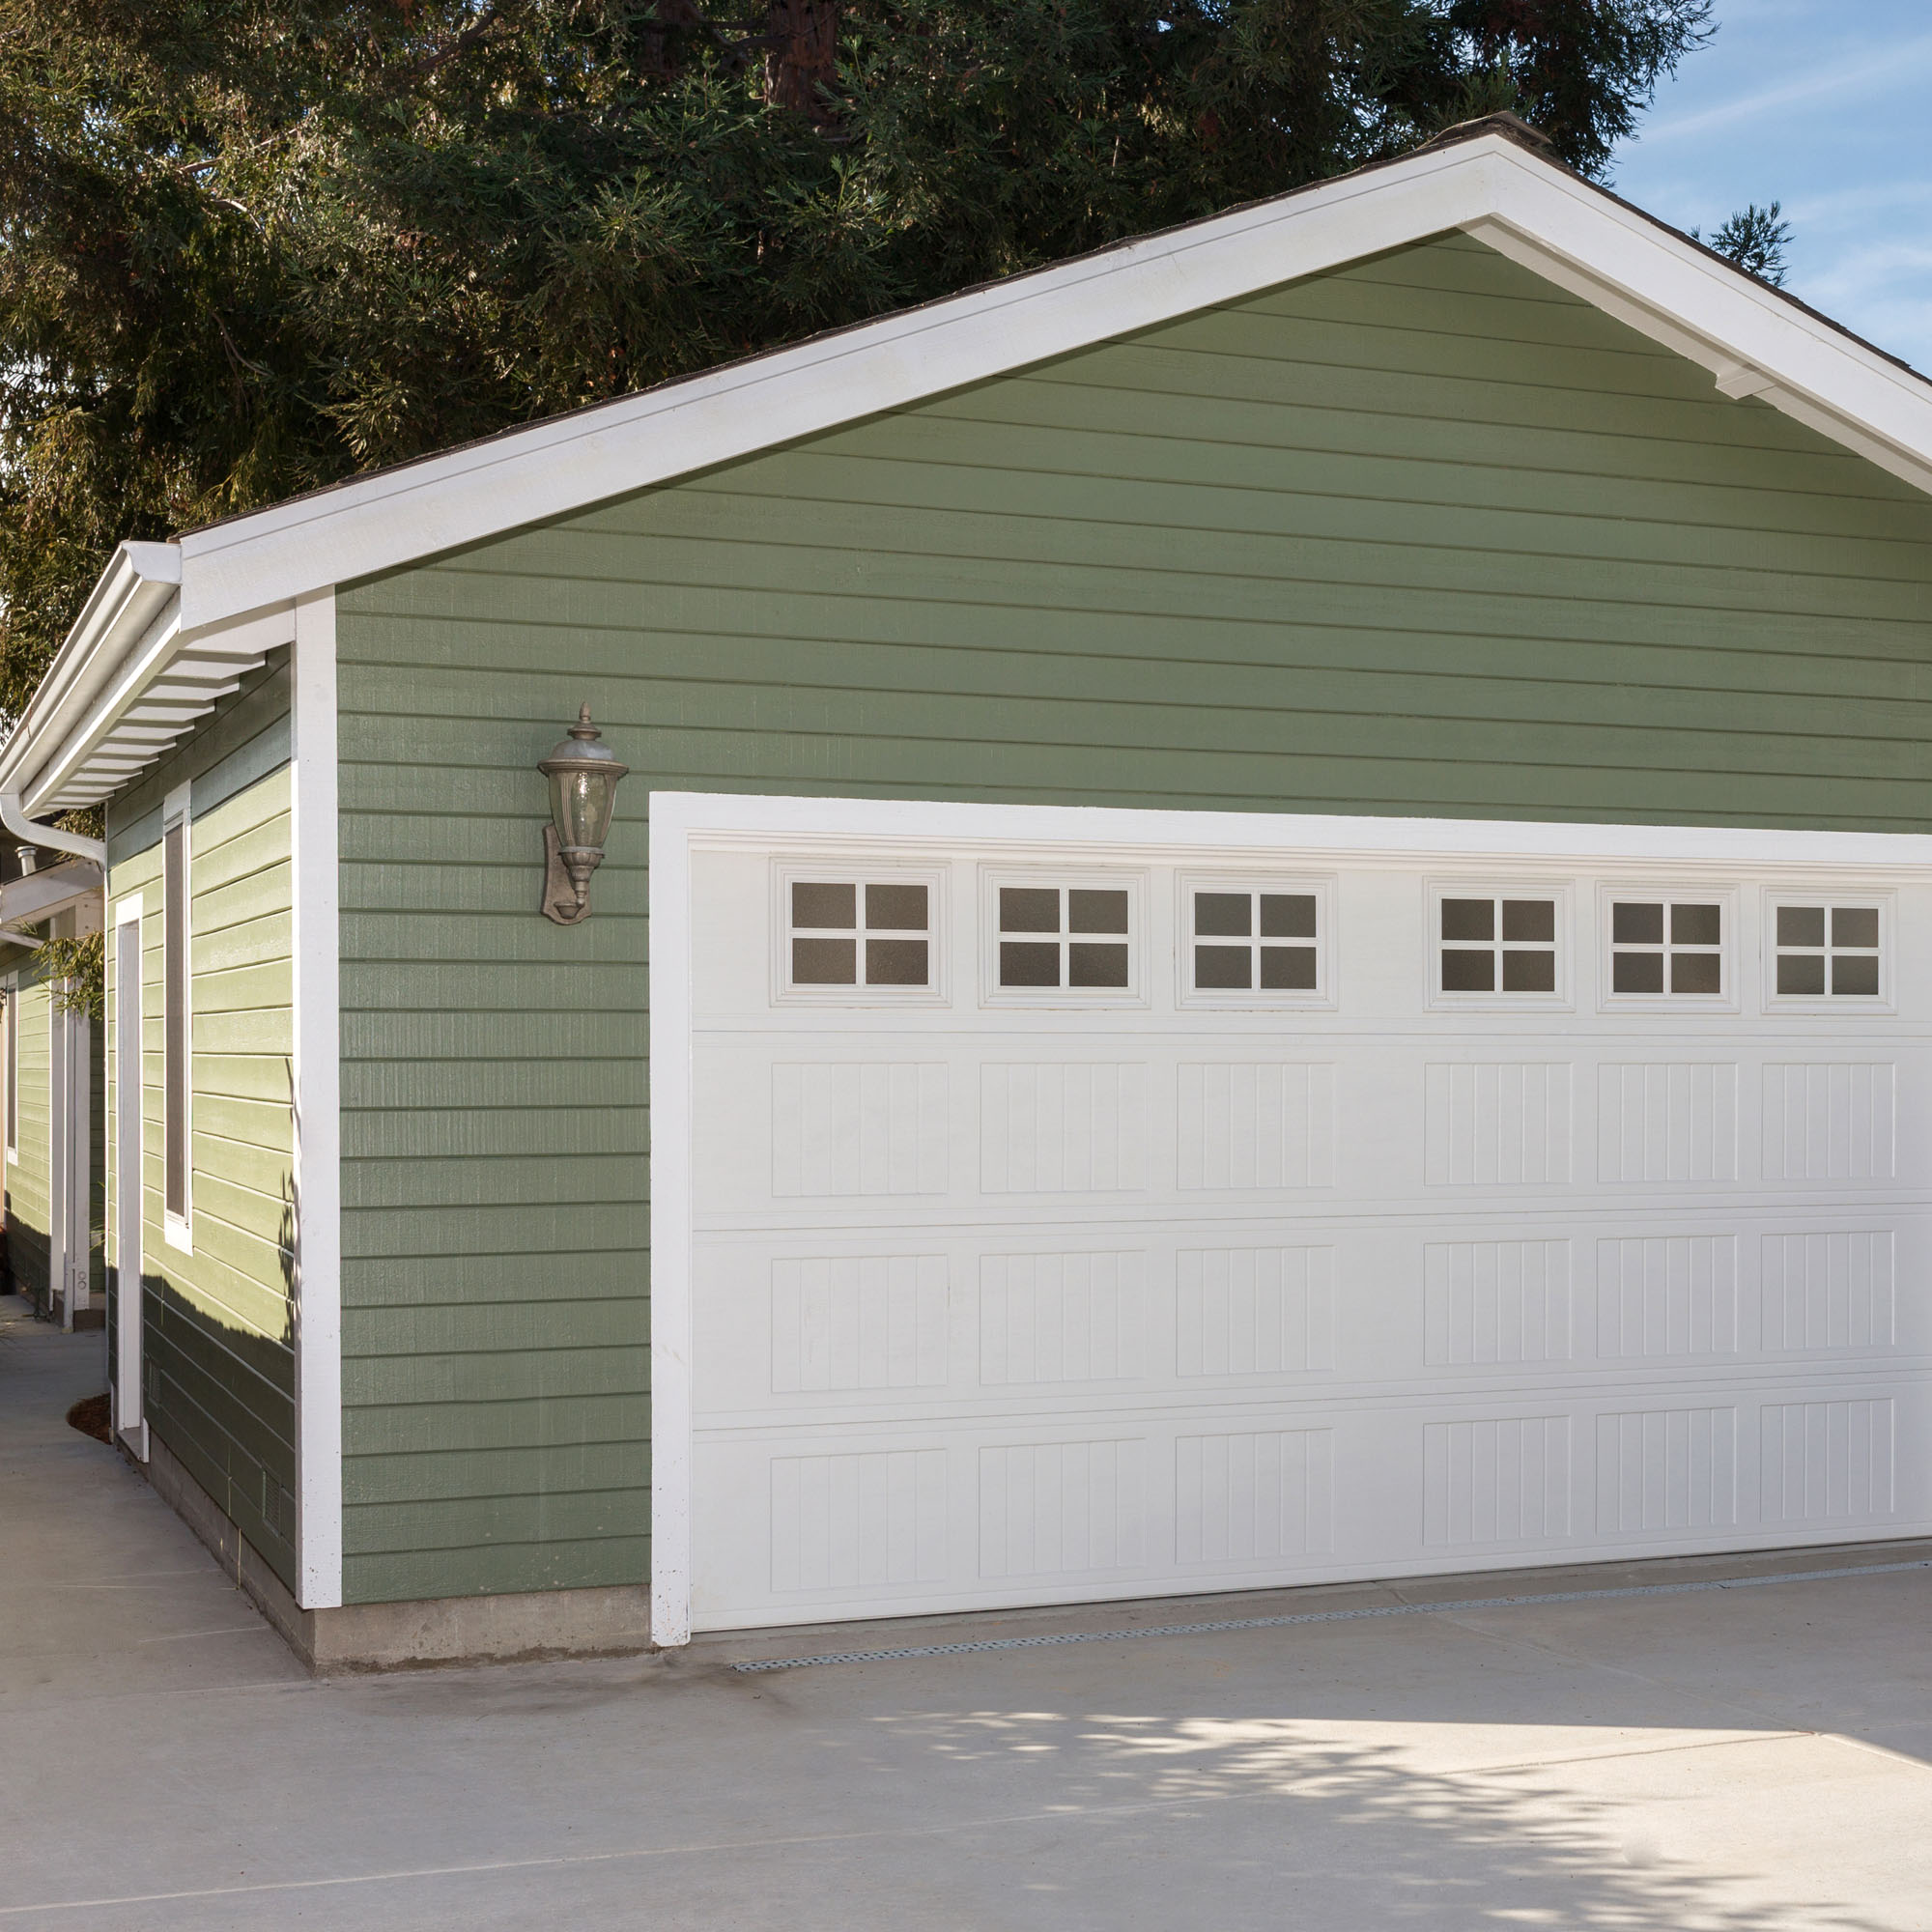 Garage and garage door security for smart homes and automation